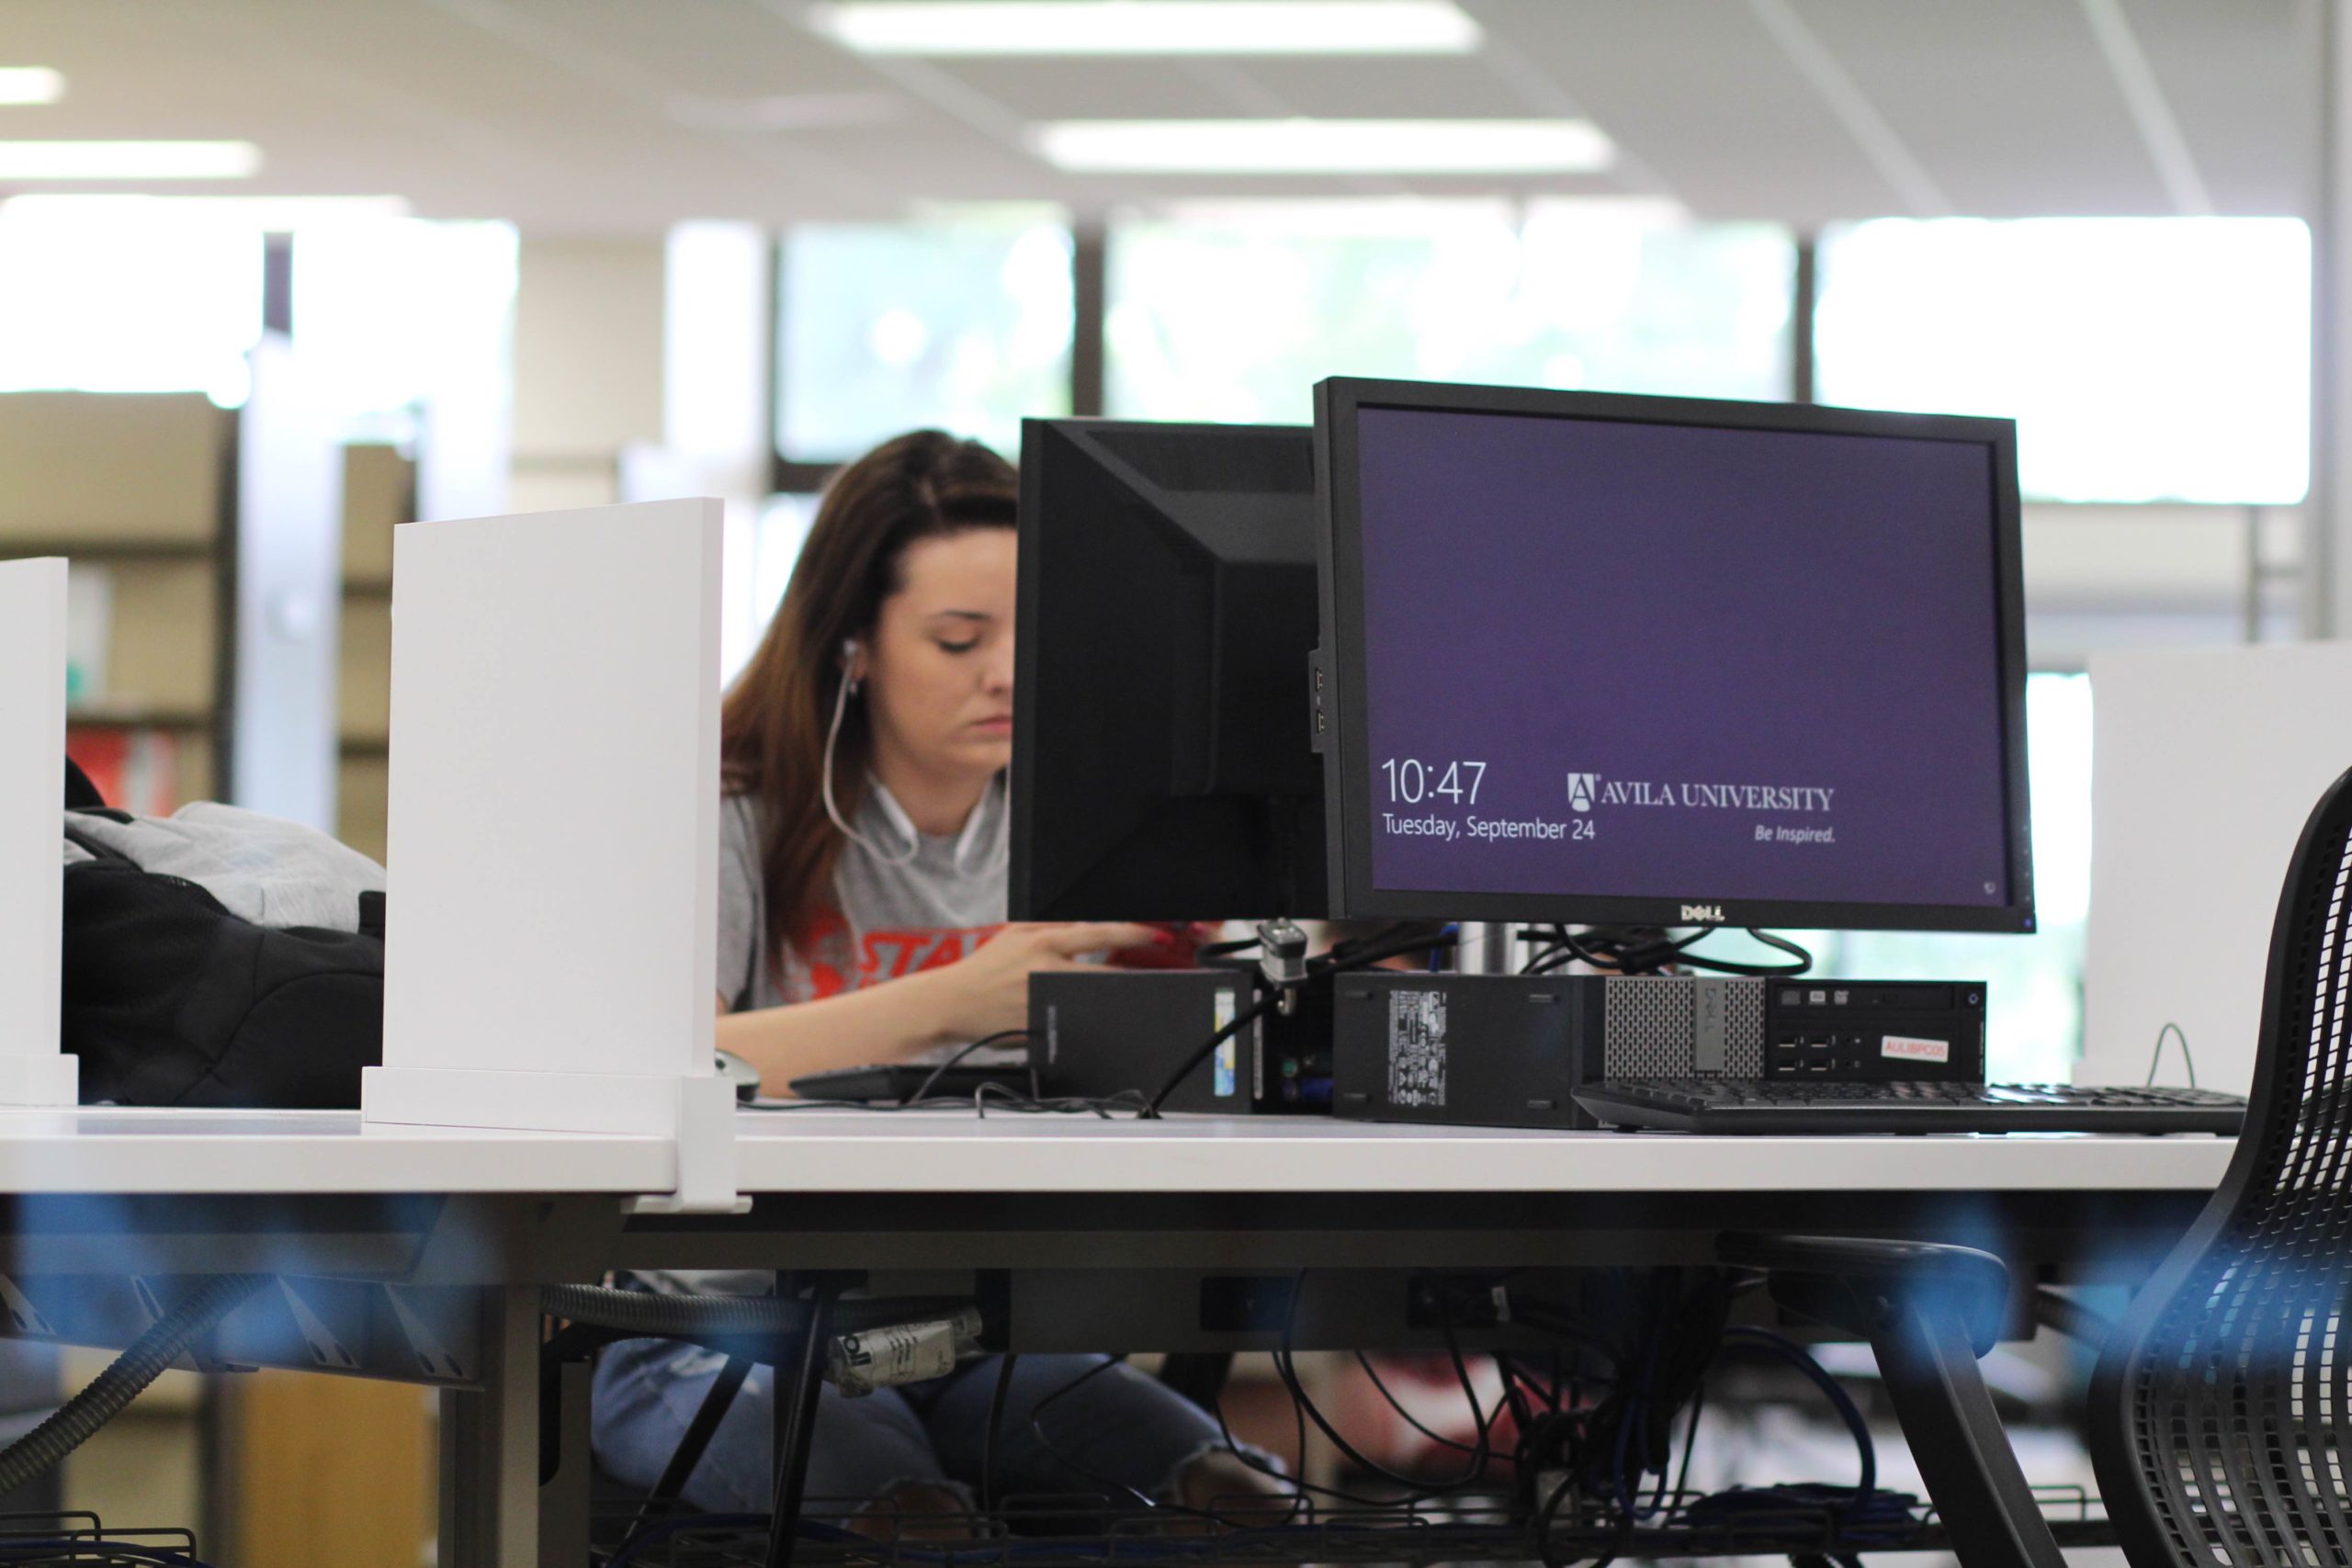 A student works at a computer station in the Learning Commons